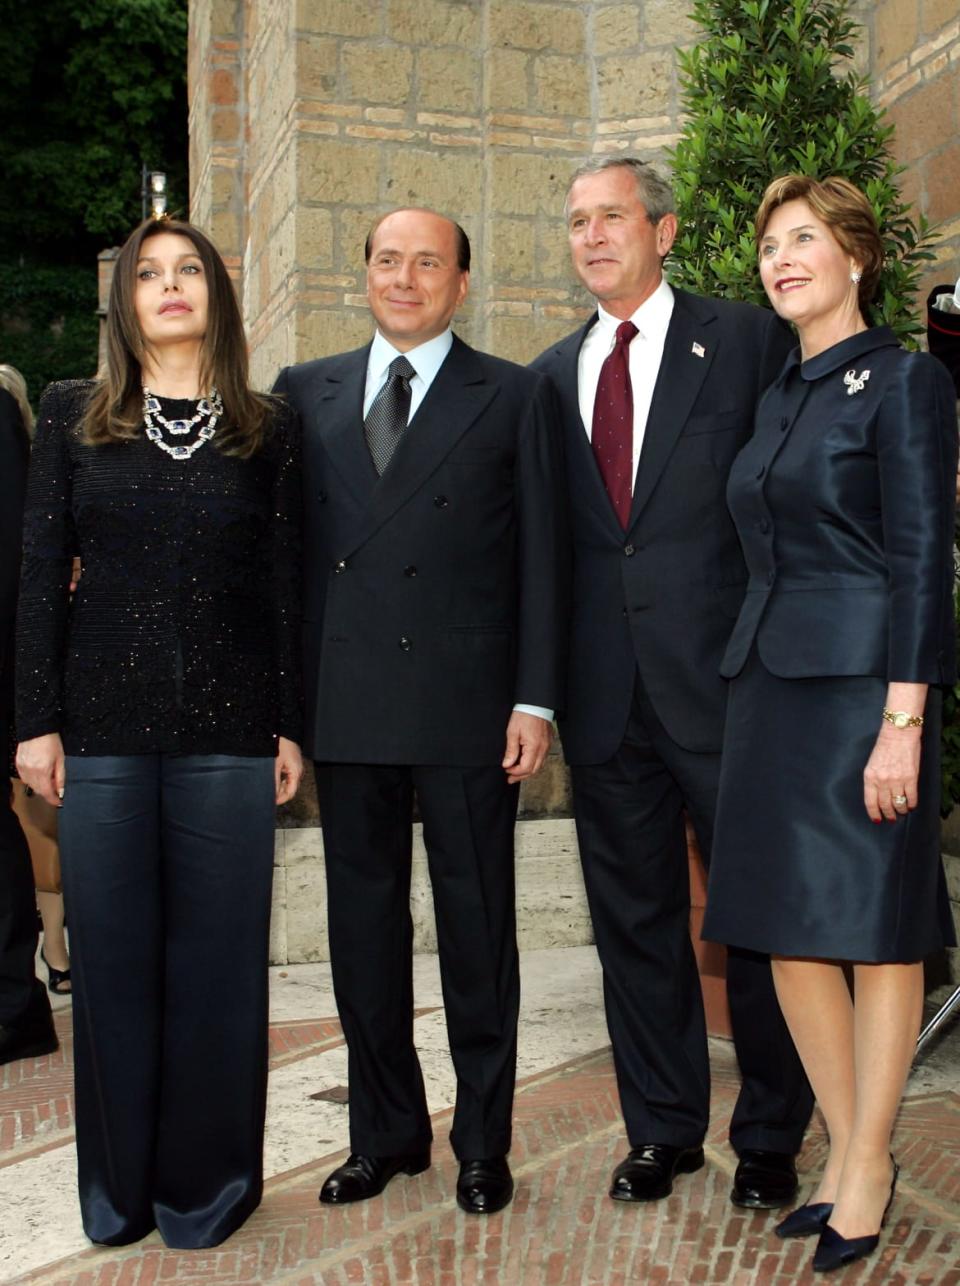 <div class="inline-image__caption"><p>Silvio Berlusconi and his then-wife Veronica Lario pose with President George W. Bush his wife, Laura, in Italy in 2004. Thousands of armed police lined the streets of the Italian capital as activists gathered to protest against the visiting president and the U.S.-led occupation of Iraq. </p></div> <div class="inline-image__credit">Reuters</div>